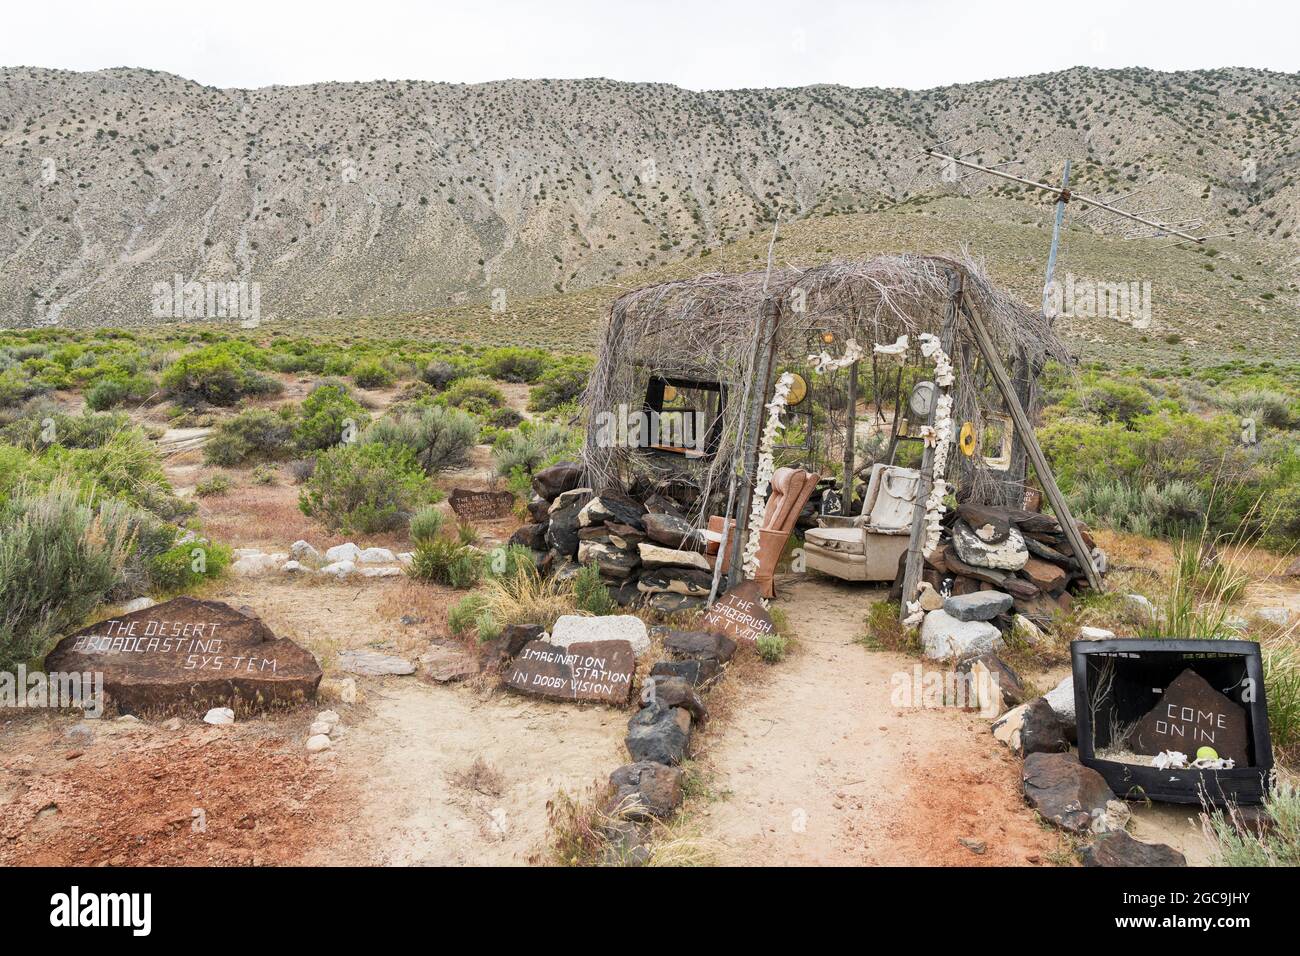 Guru road is full of quirky art in the Black Rock High Rock National Conservation Area, NV, 2020. Stock Photo